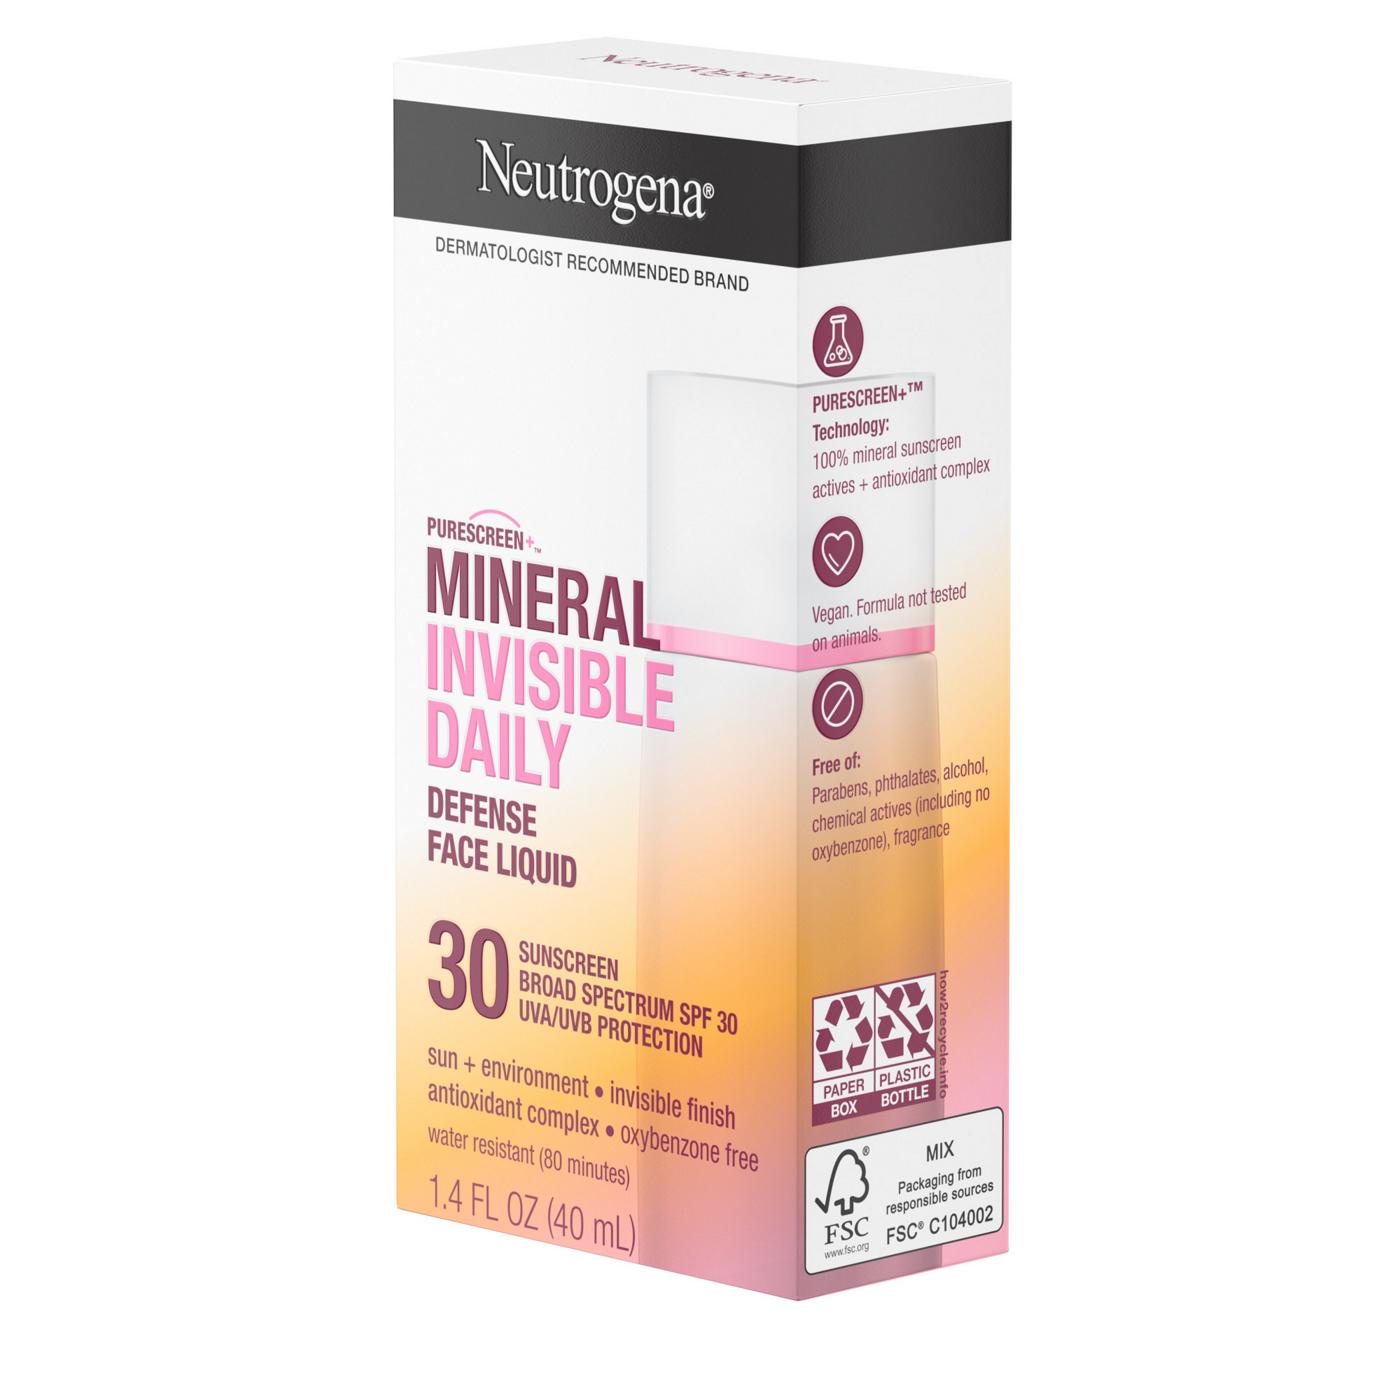 Neutrogena Mineral Invisible Daily Defense Face Sunscreen SPF 30; image 4 of 8